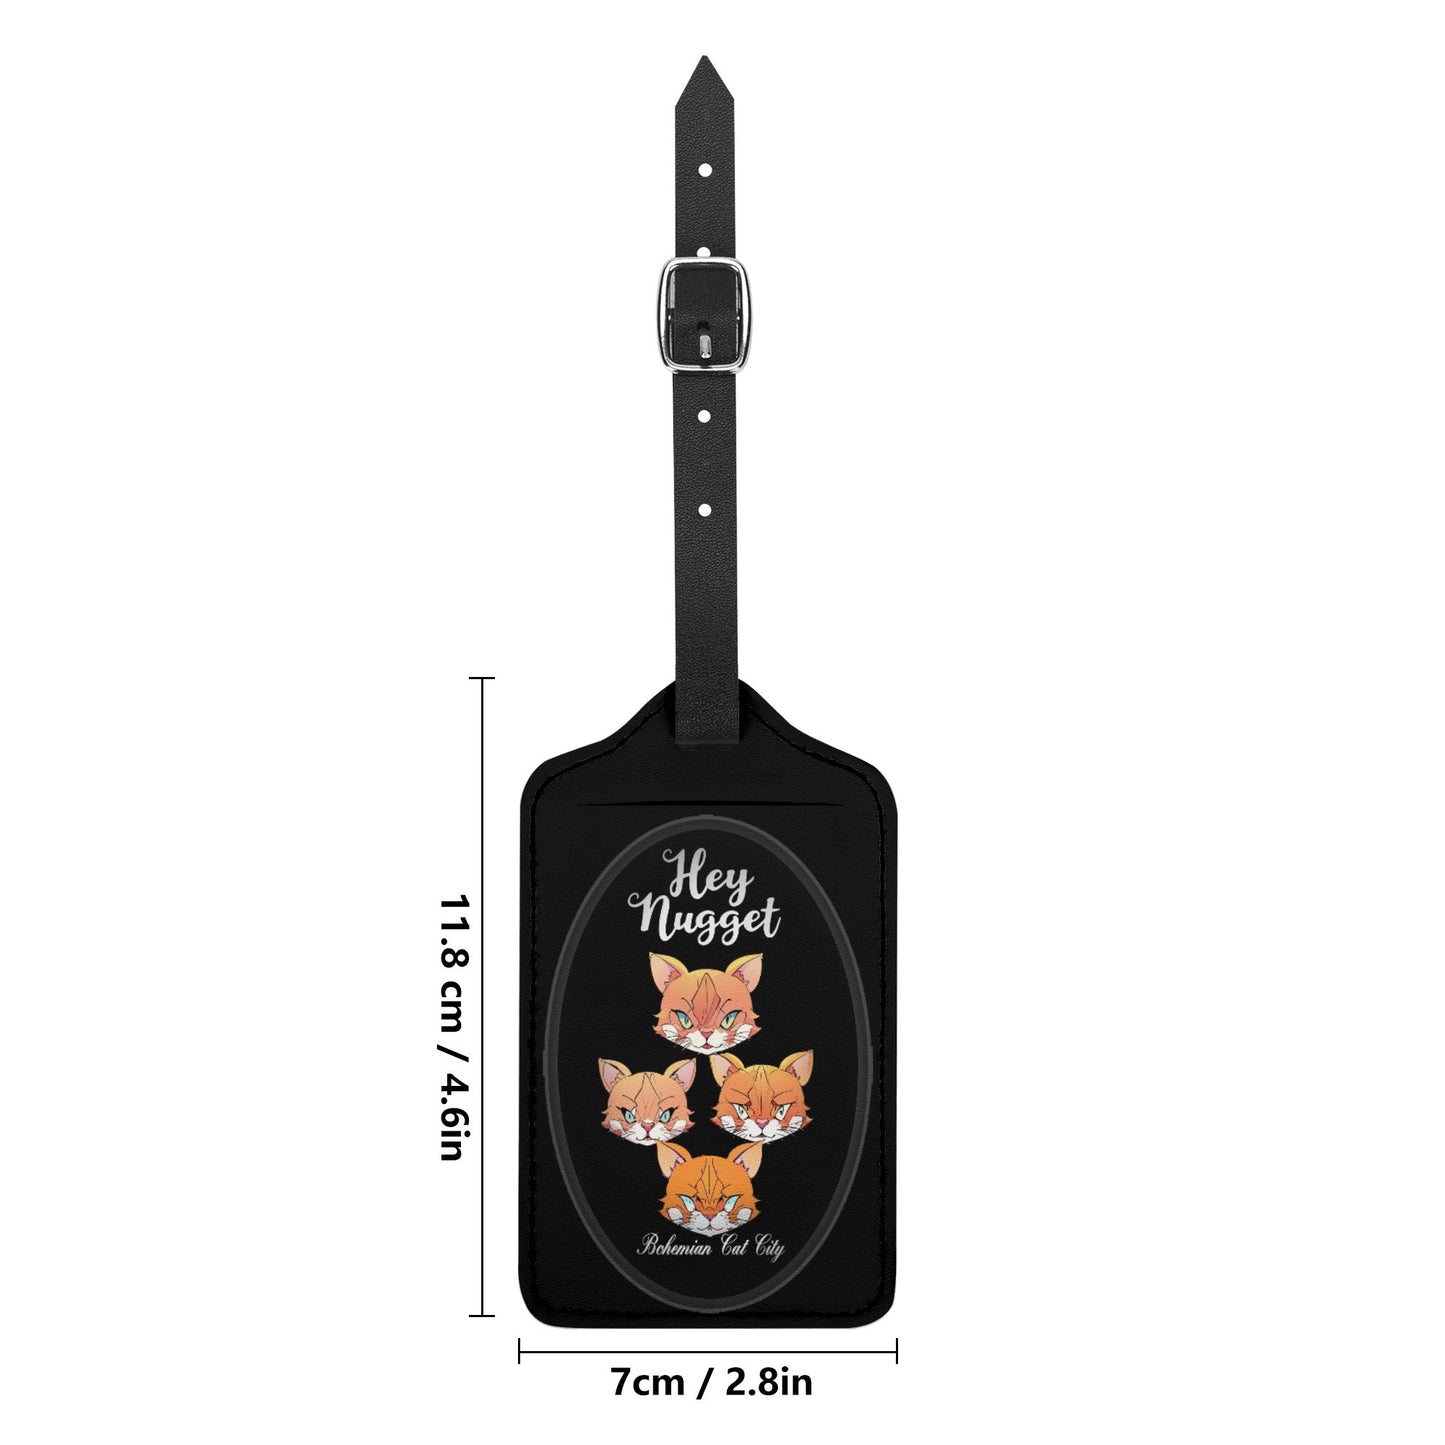 Stand out  with the  Bohemian Cat City  Luggage Tags  available at Hey Nugget. Grab yours today!